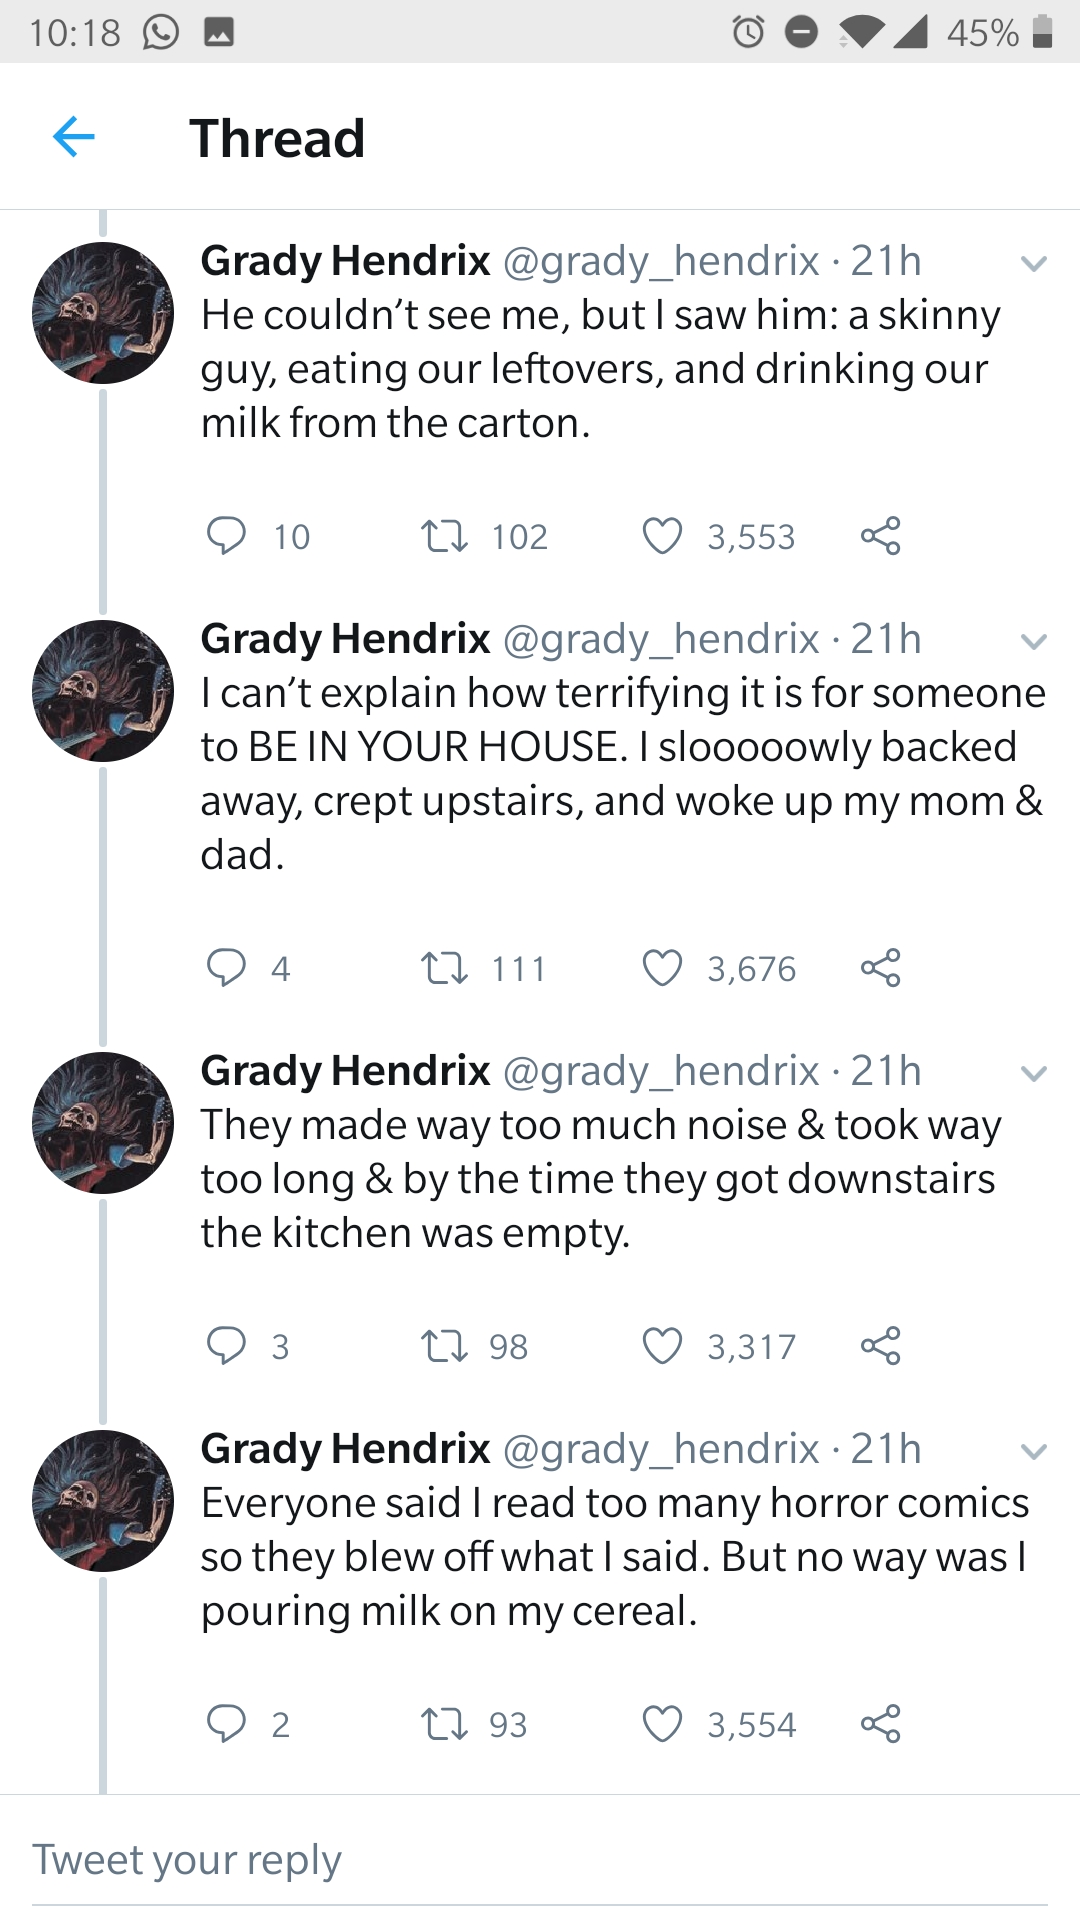 0 45% Thread Grady Hendrix hendrix. 21h He couldn't see me, but I saw him a skinny guy, eating our leftovers, and drinking our milk from the carton. O 102 102 3,553 Grady Hendrix 21h I can't explain how terrifying it is for someone to Be In Your House. I…